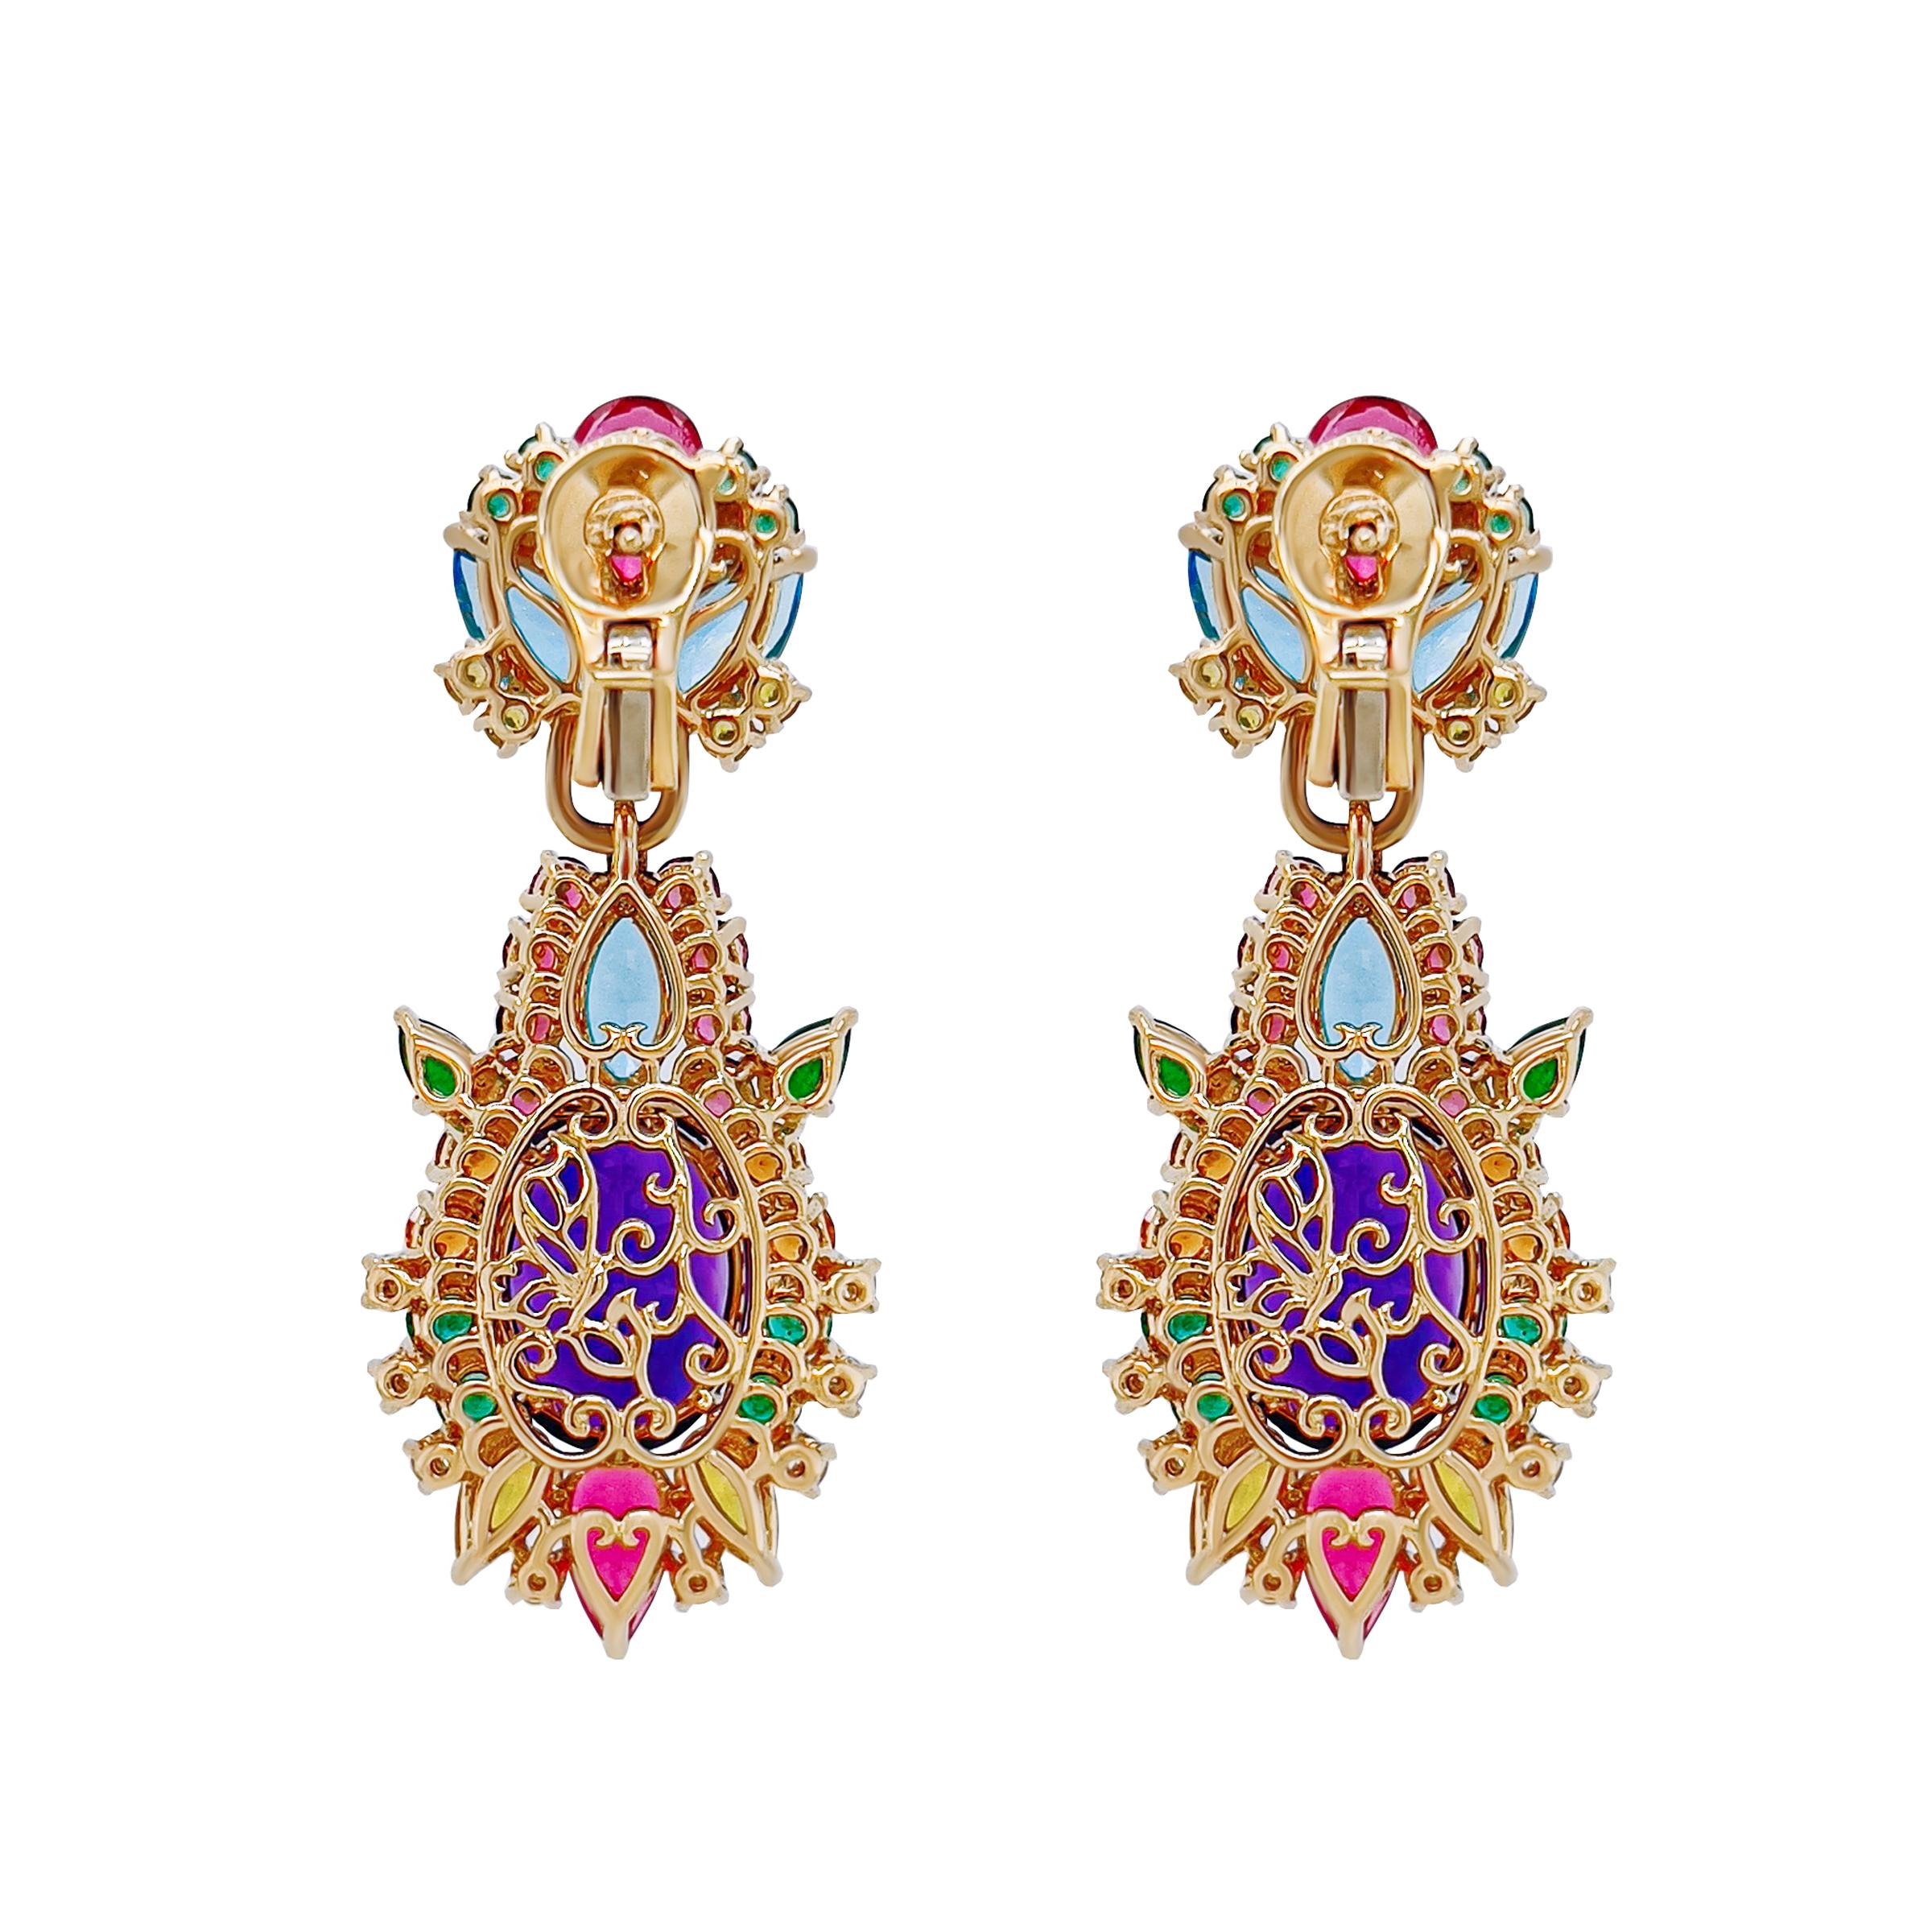 Set in 18k yellow gold, this pair of earrings showcase a lush abbundance of coloured gems. A natural amethyst centre stone totalling 117.04 carats is surrounded by an intricate selection of top quality natural coloured stones such as emeralds,